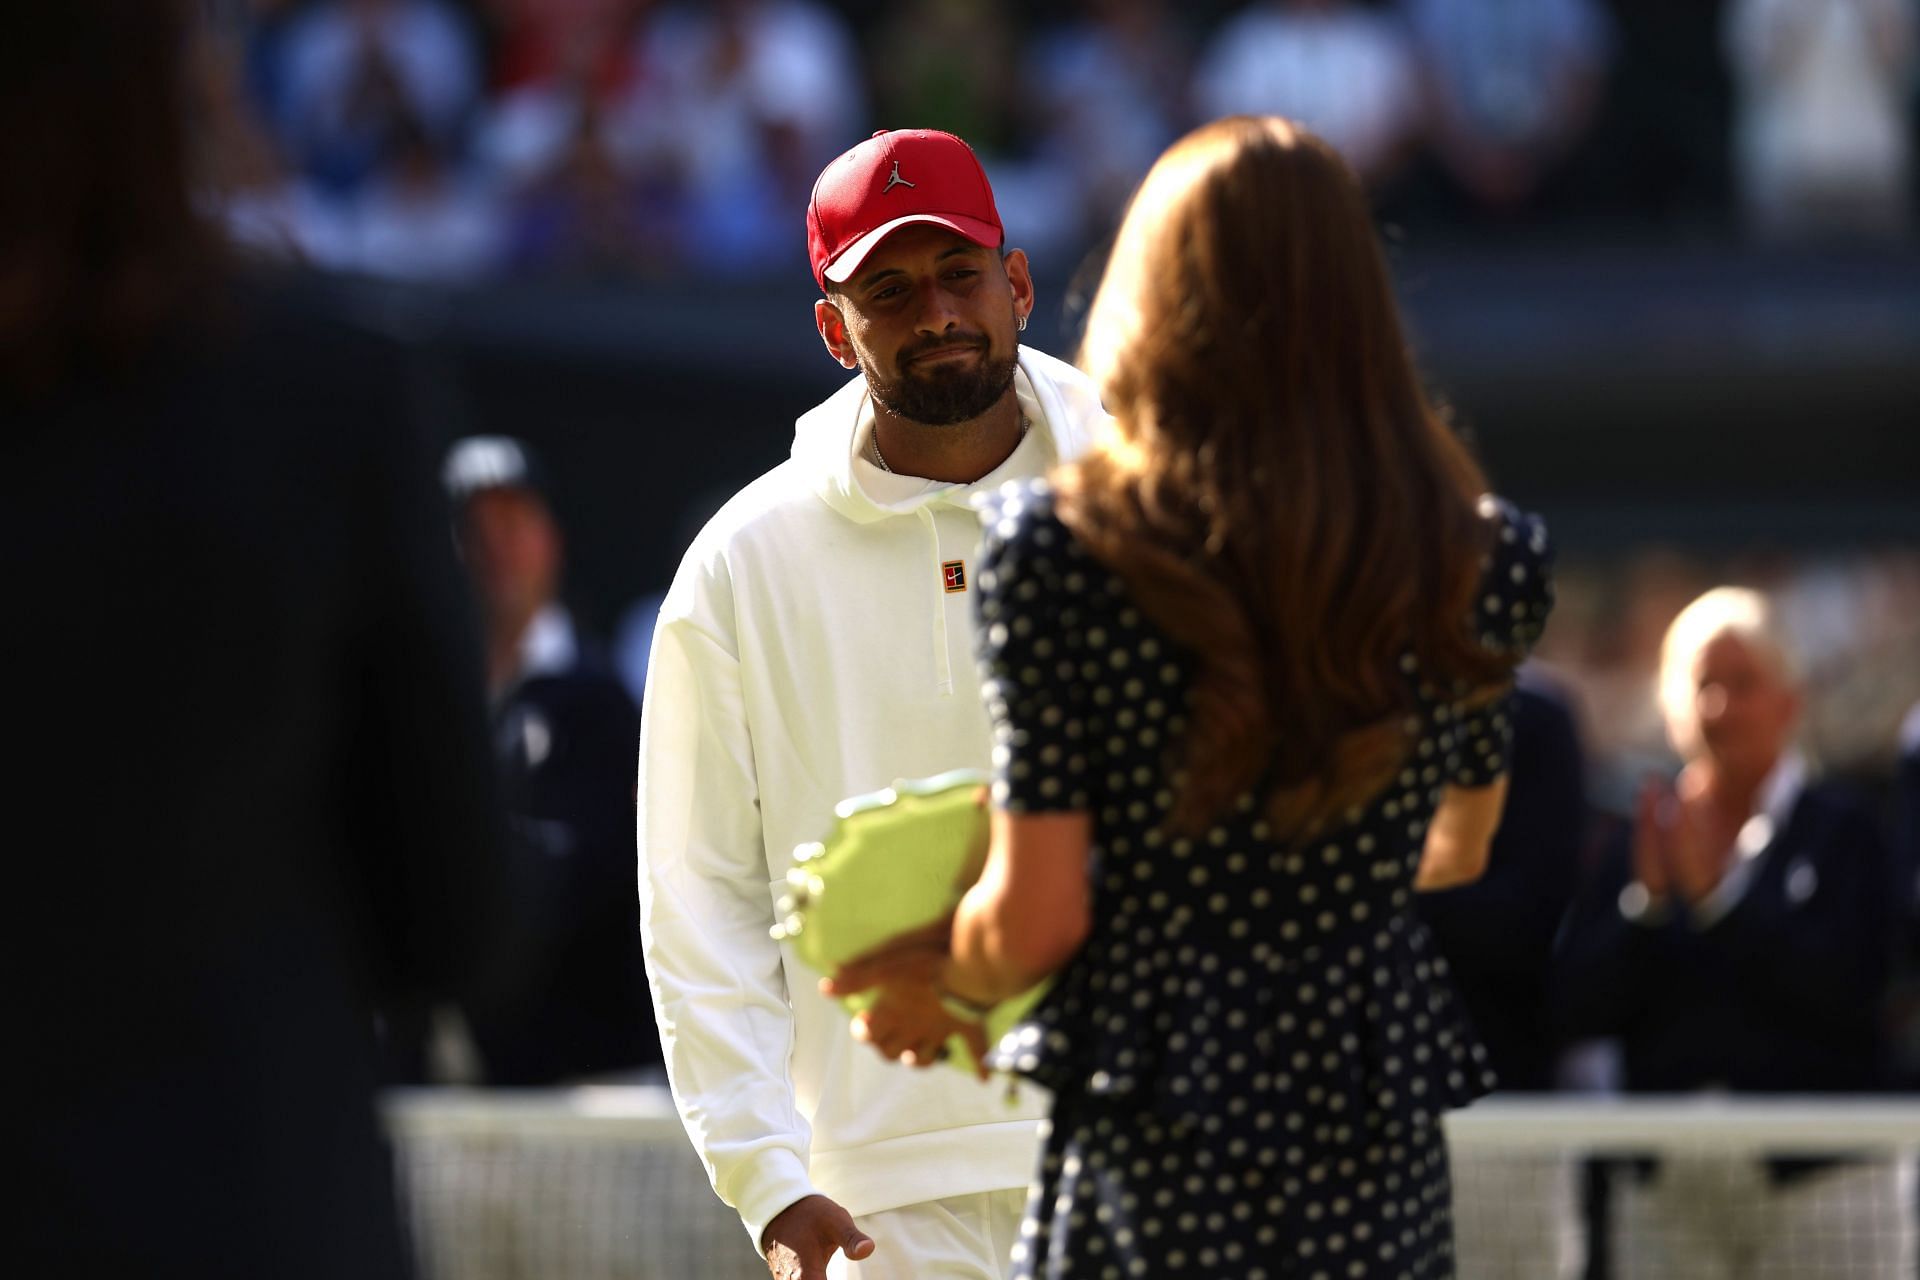 Nick Kyrgios being handed the runner-up trophy by the Duchess of Cambridge